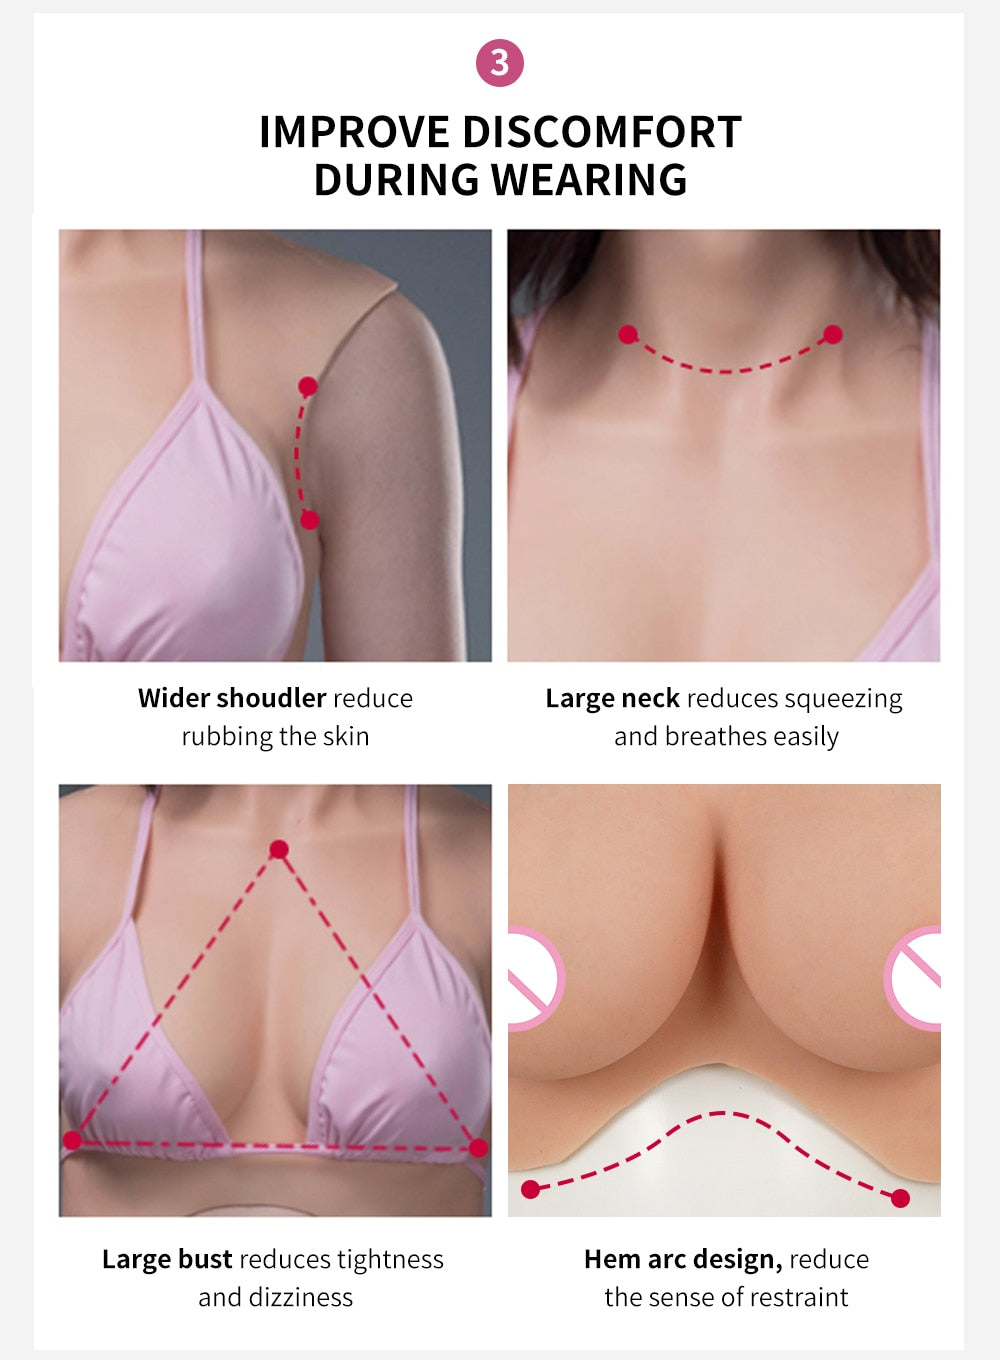 9th New L-K Cup Silicon Cosplay Boobs False Breast Party Breastplate Tranny Silicone Boobs With Flocking Huge Breast Forms